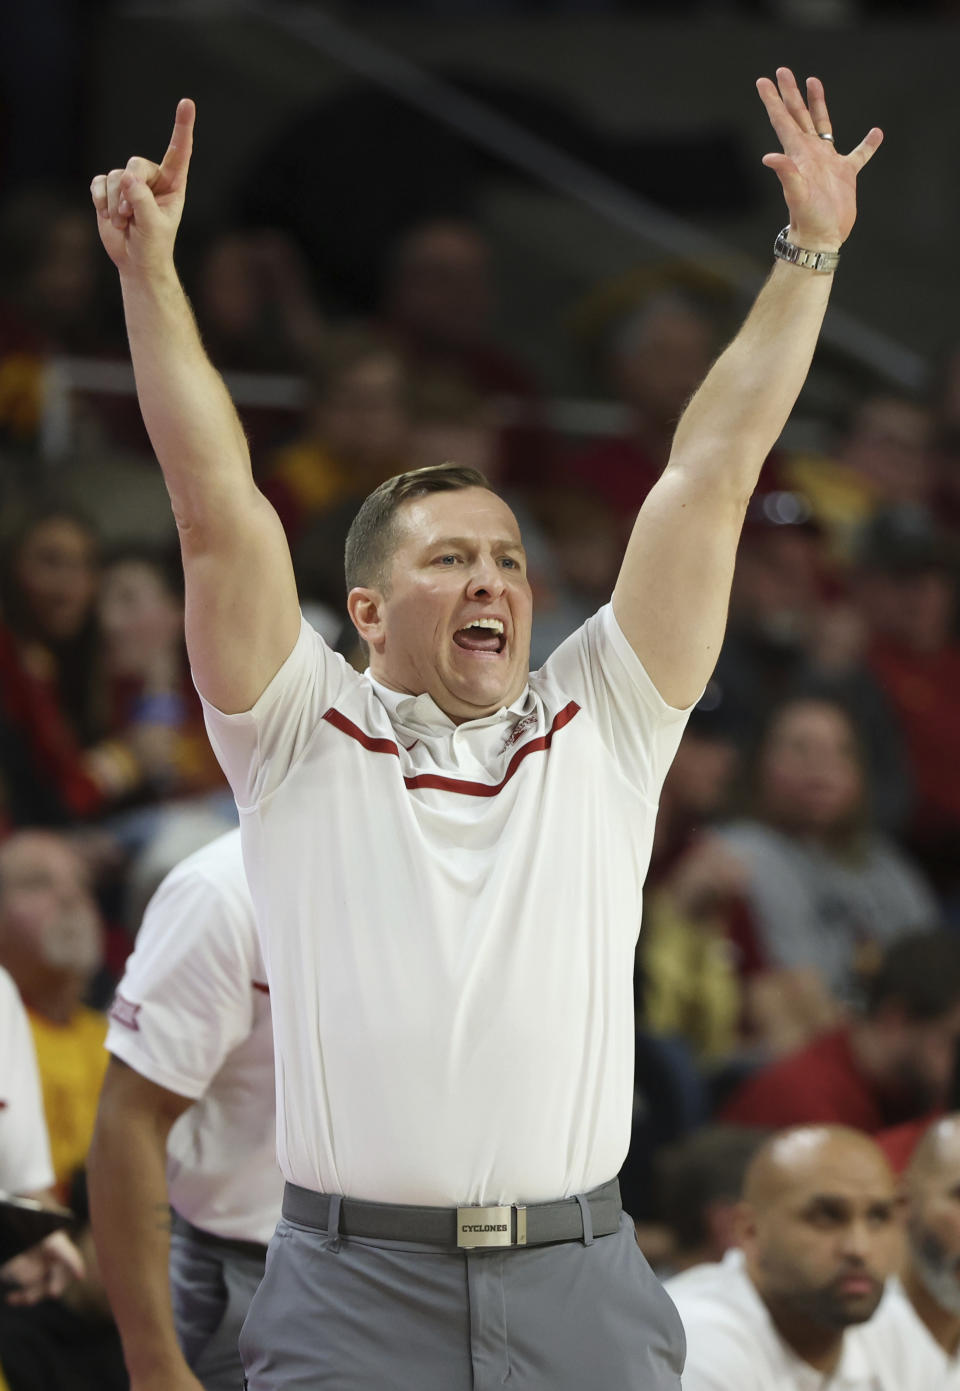 Iowa State head coach T.J. Otzelberger yells out instructions to his team during the second half of an NCAA college basketball game against Oklahoma, Saturday, Feb. 25, 2023, in Ames, Iowa. (AP Photo/Justin Hayworth)